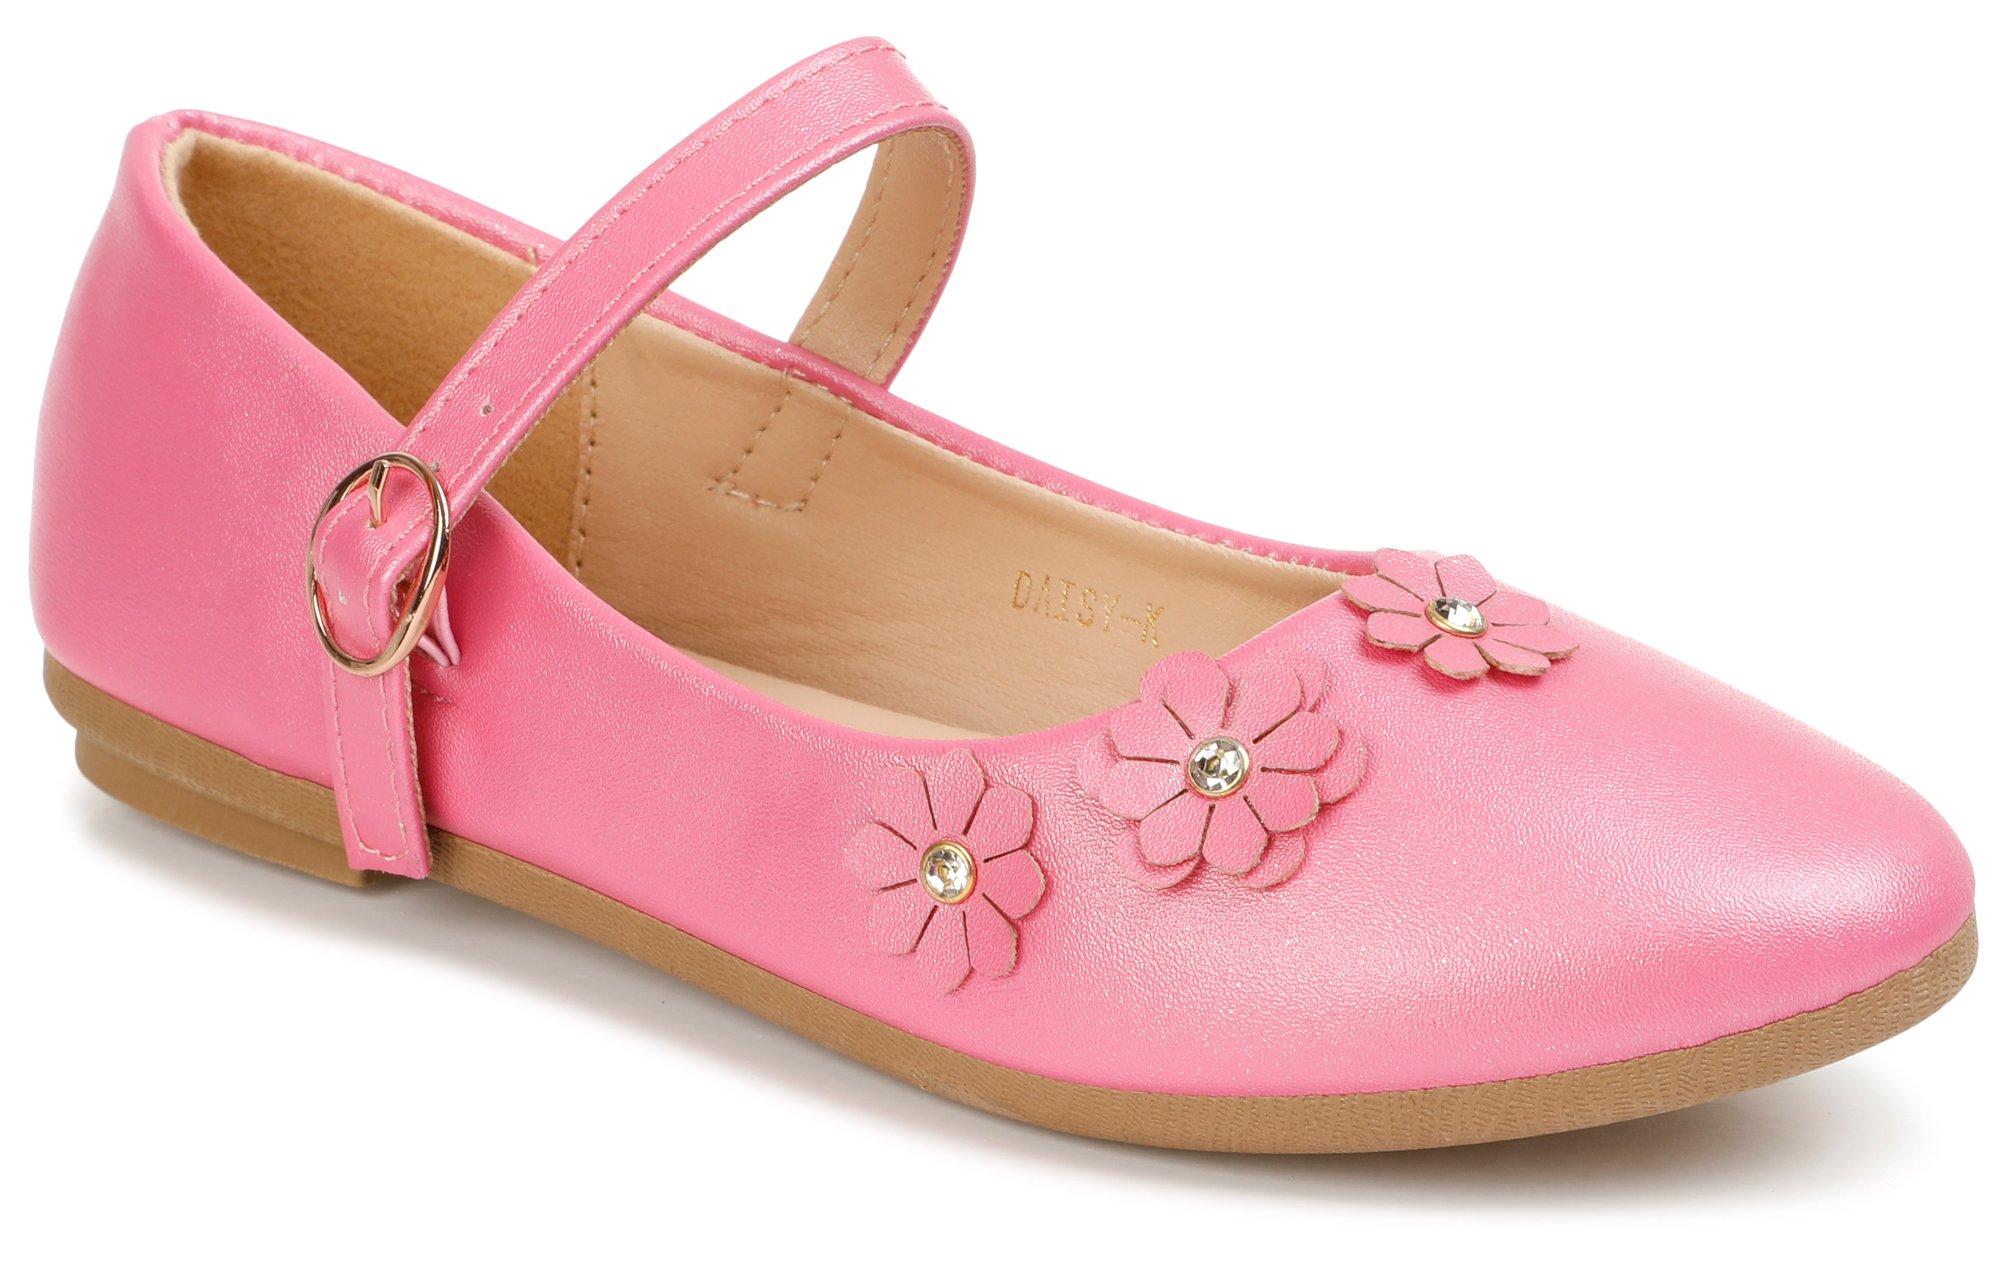 Girls Mary-Jane Floral Flats